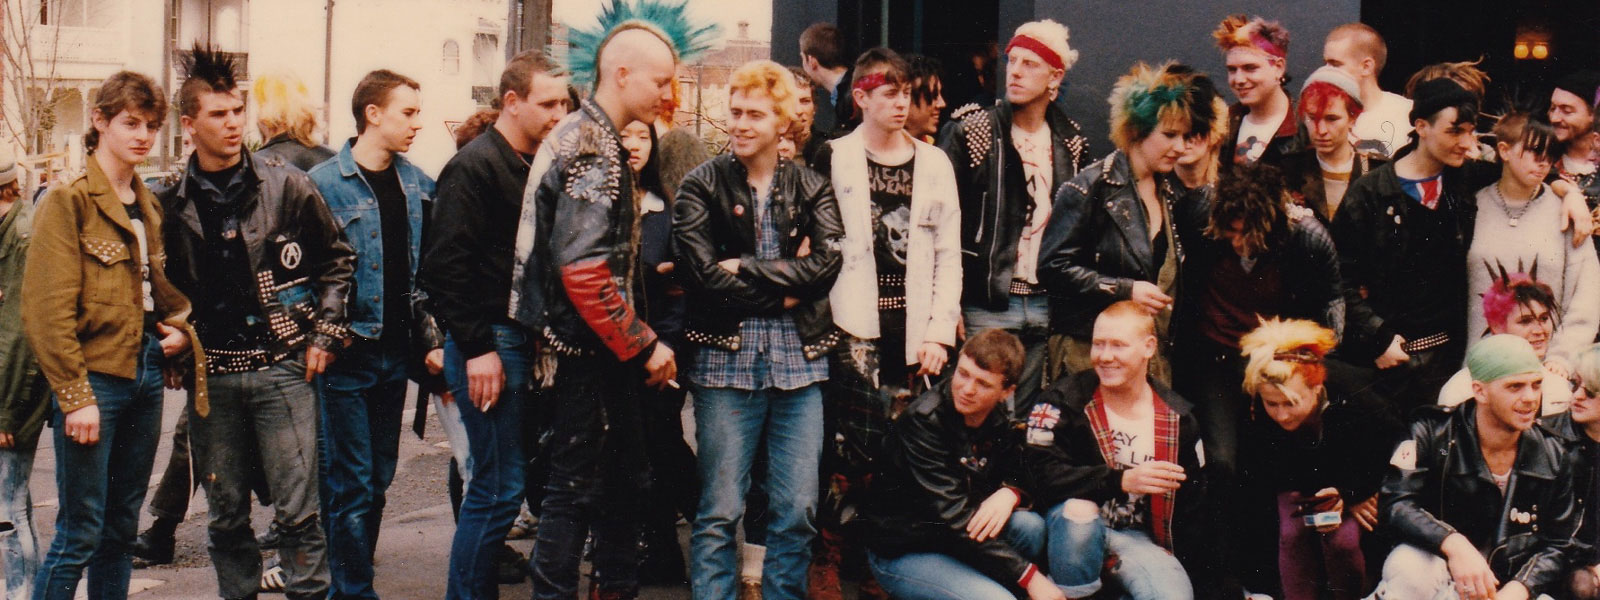 Image from 'Age of Rage - The Australian Punk Revolution'